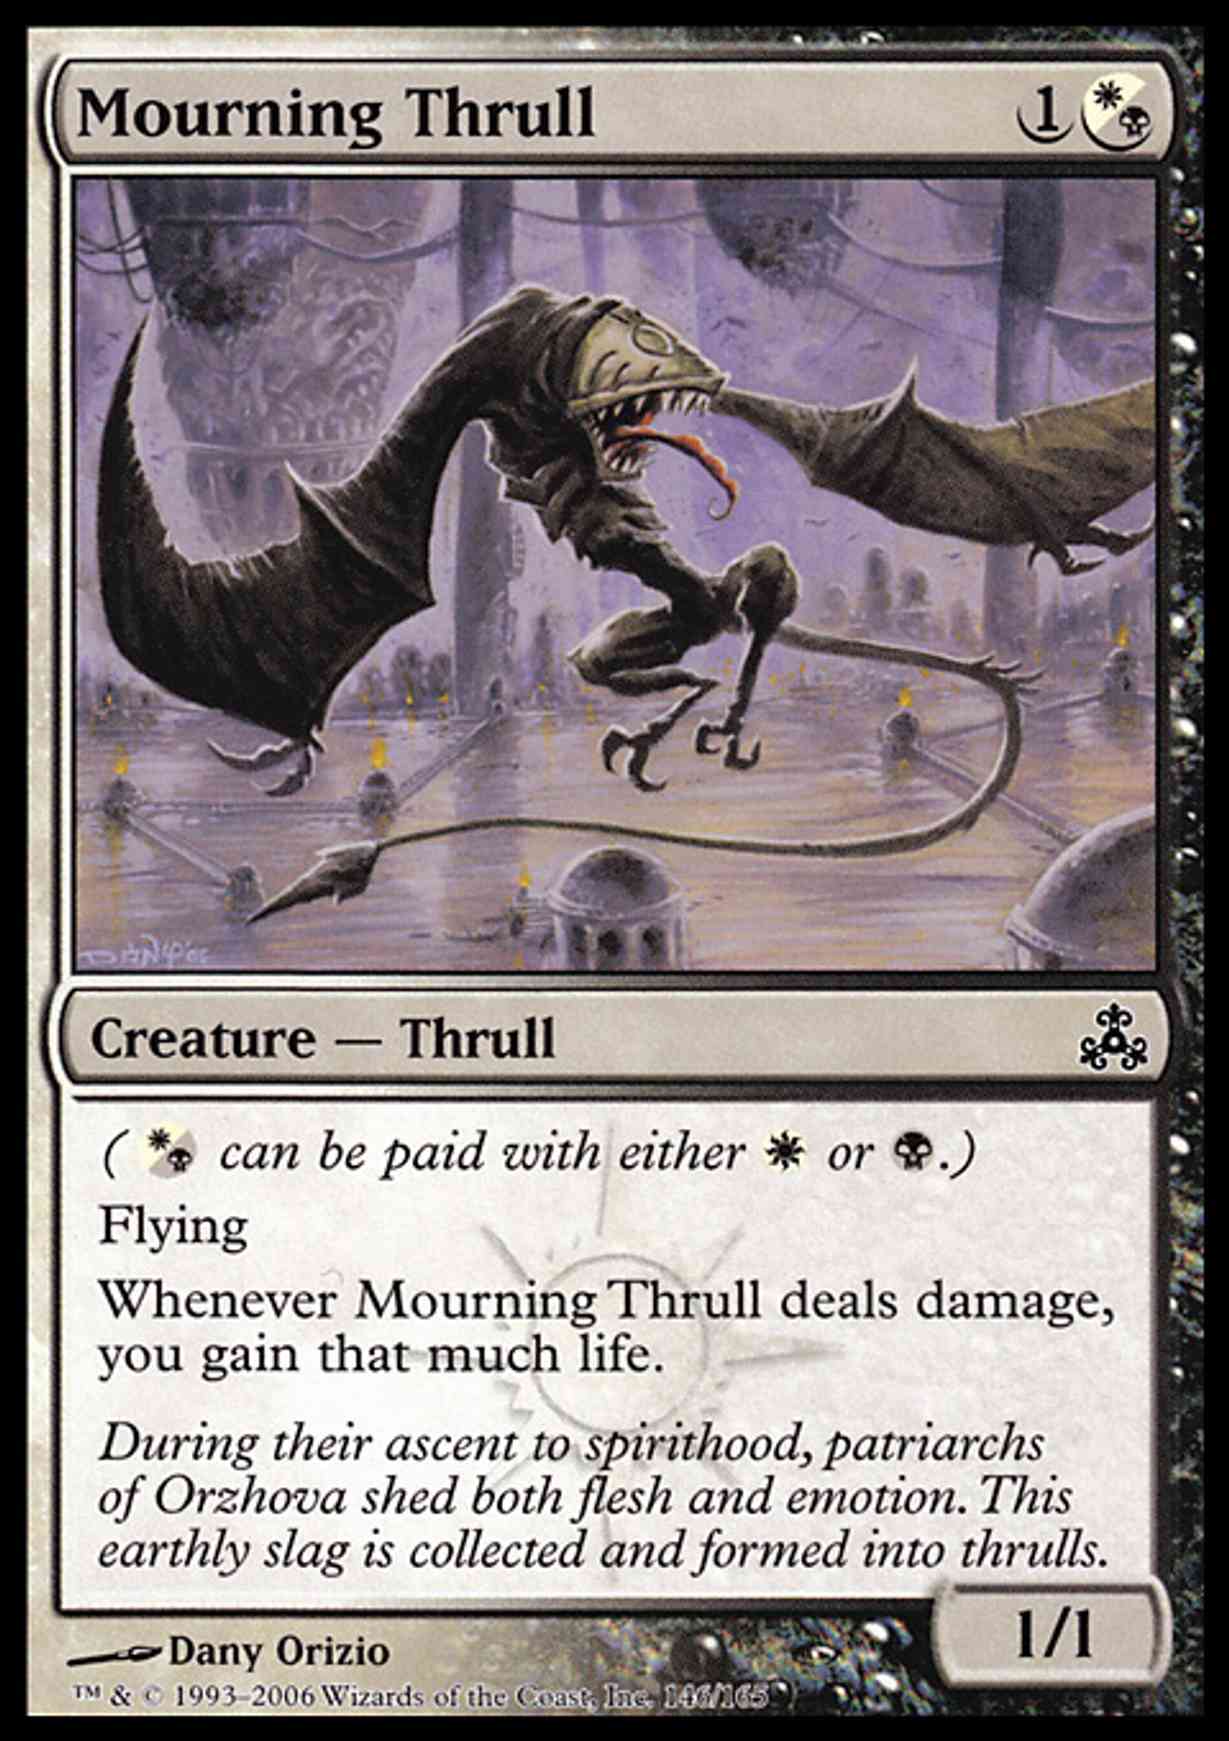 Mourning Thrull magic card front